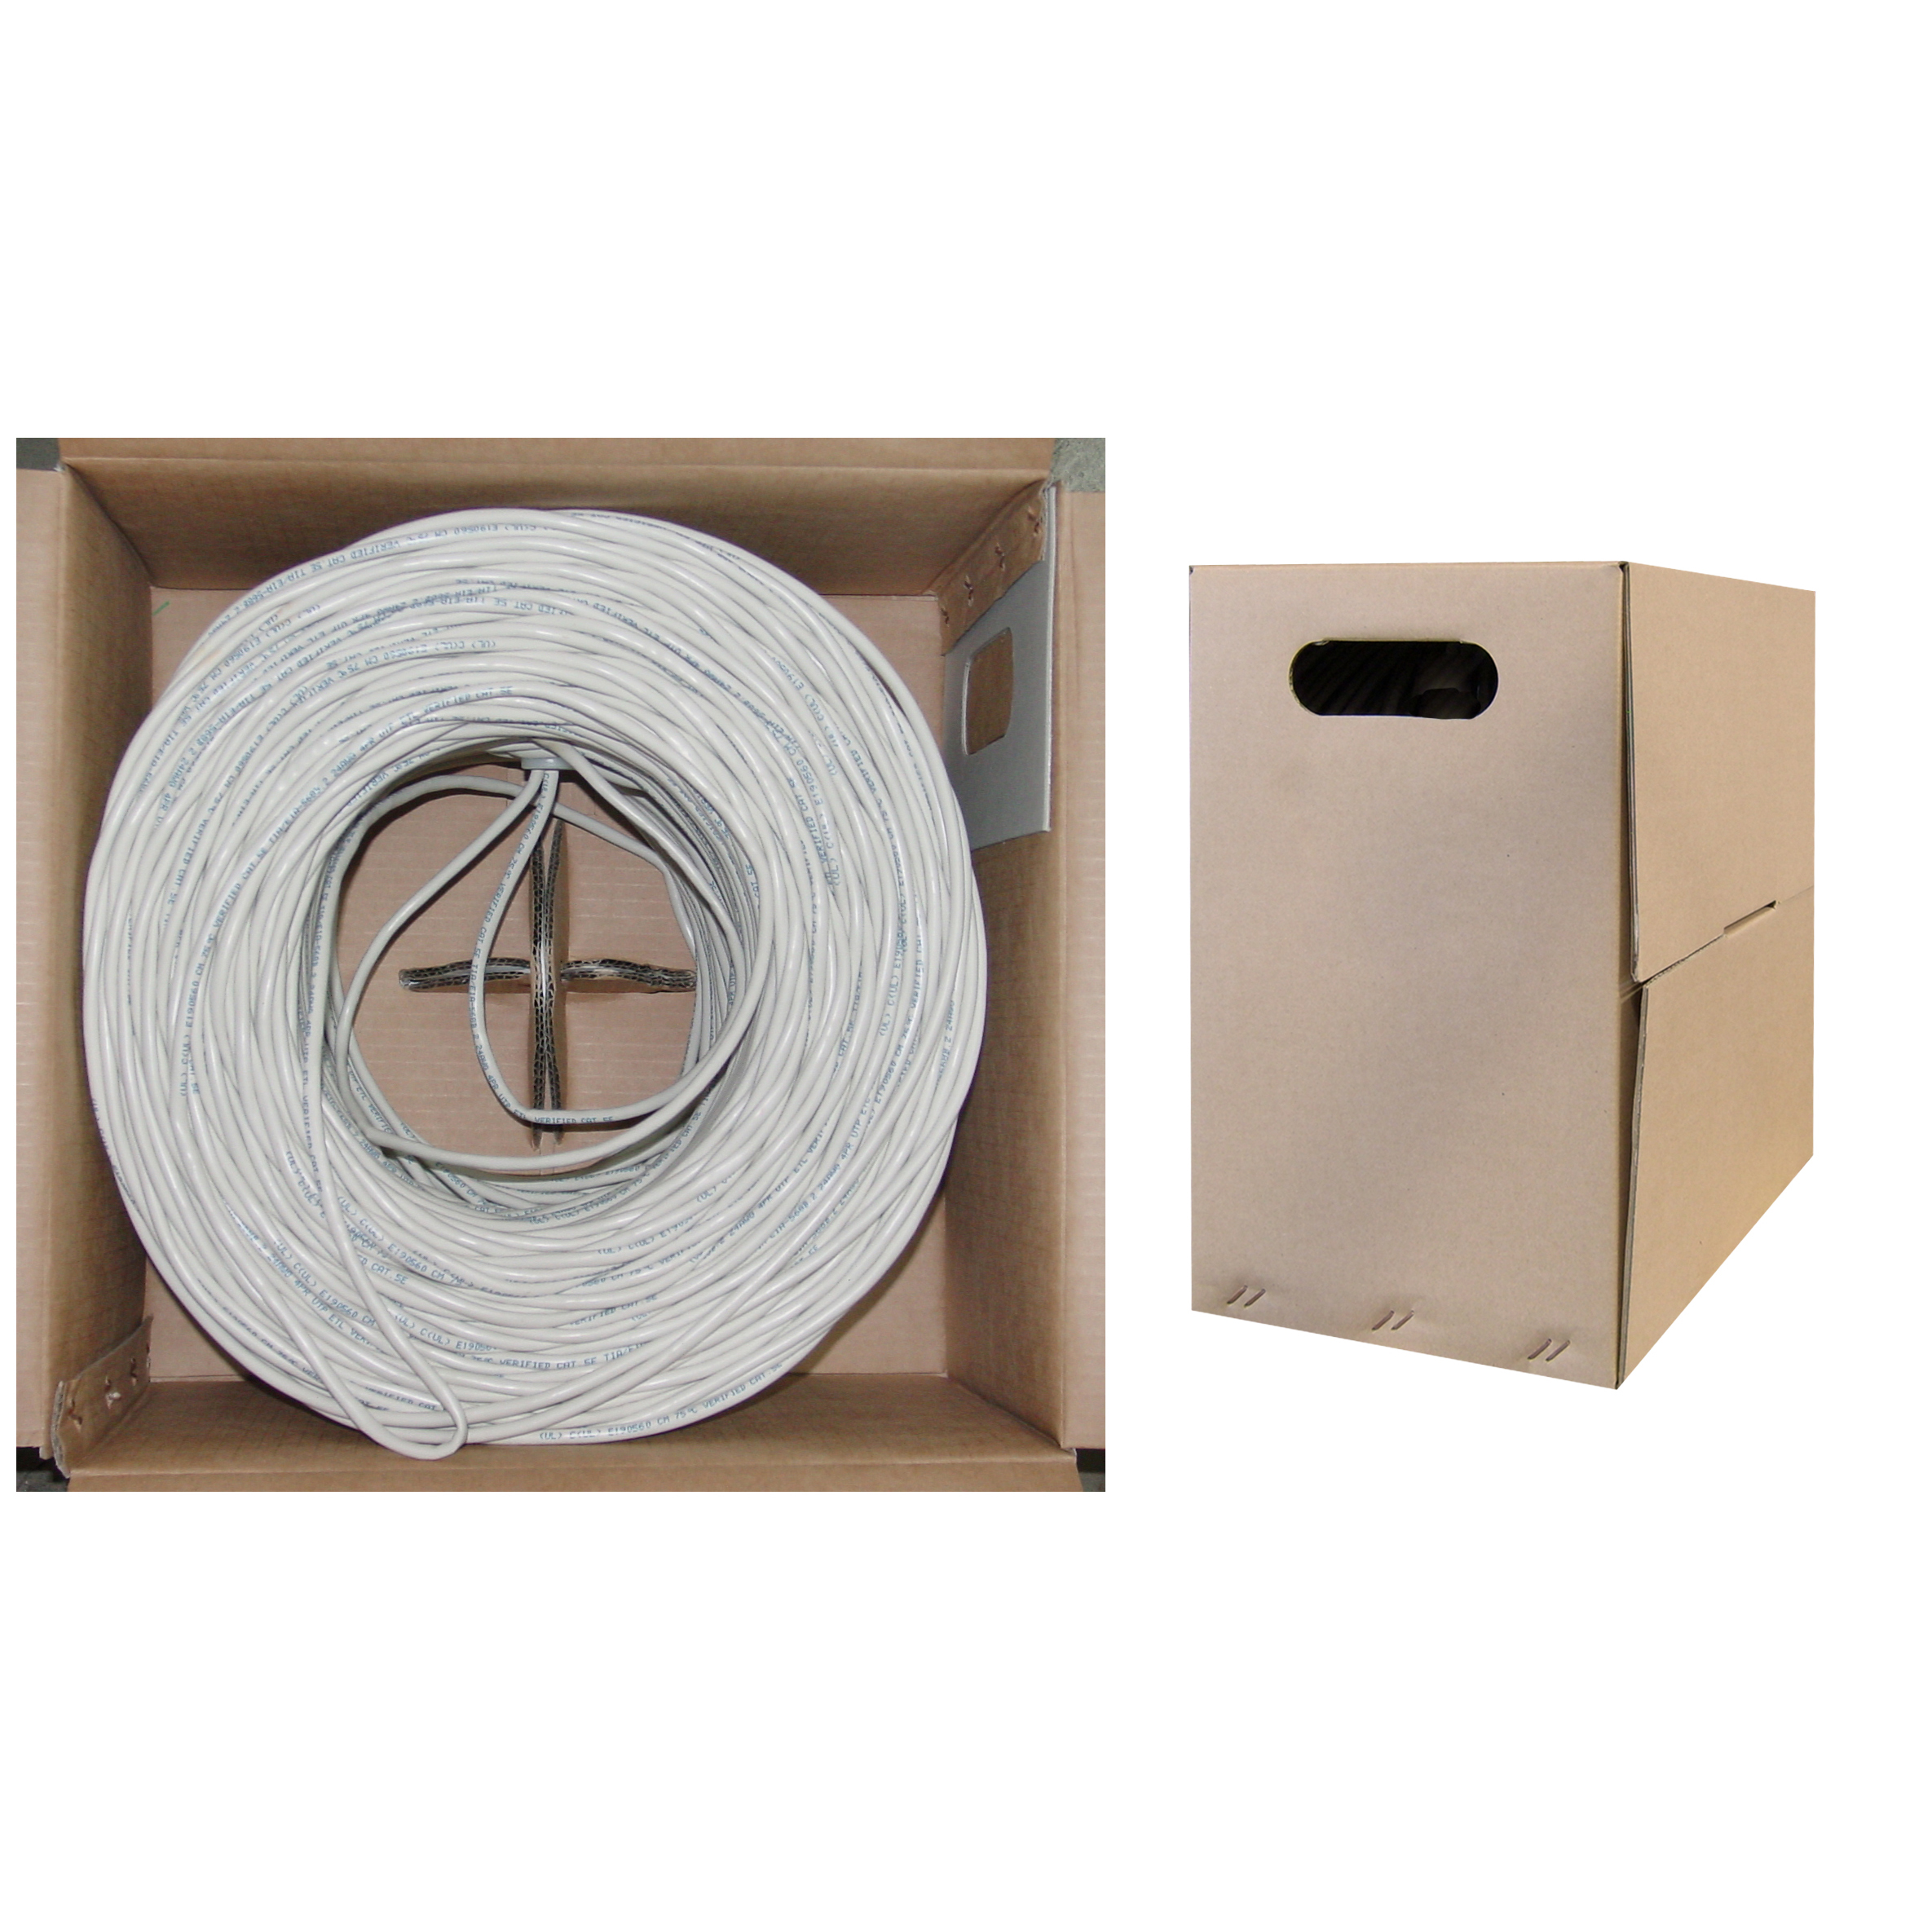 White CableWholesale 1000 Foot Bulk Cat6 Ethernet Cable Unshielded Twisted Pair 24 AWG UTP with Pull Box ETL Listed 4 Pair Solid Copper 350 Mhz